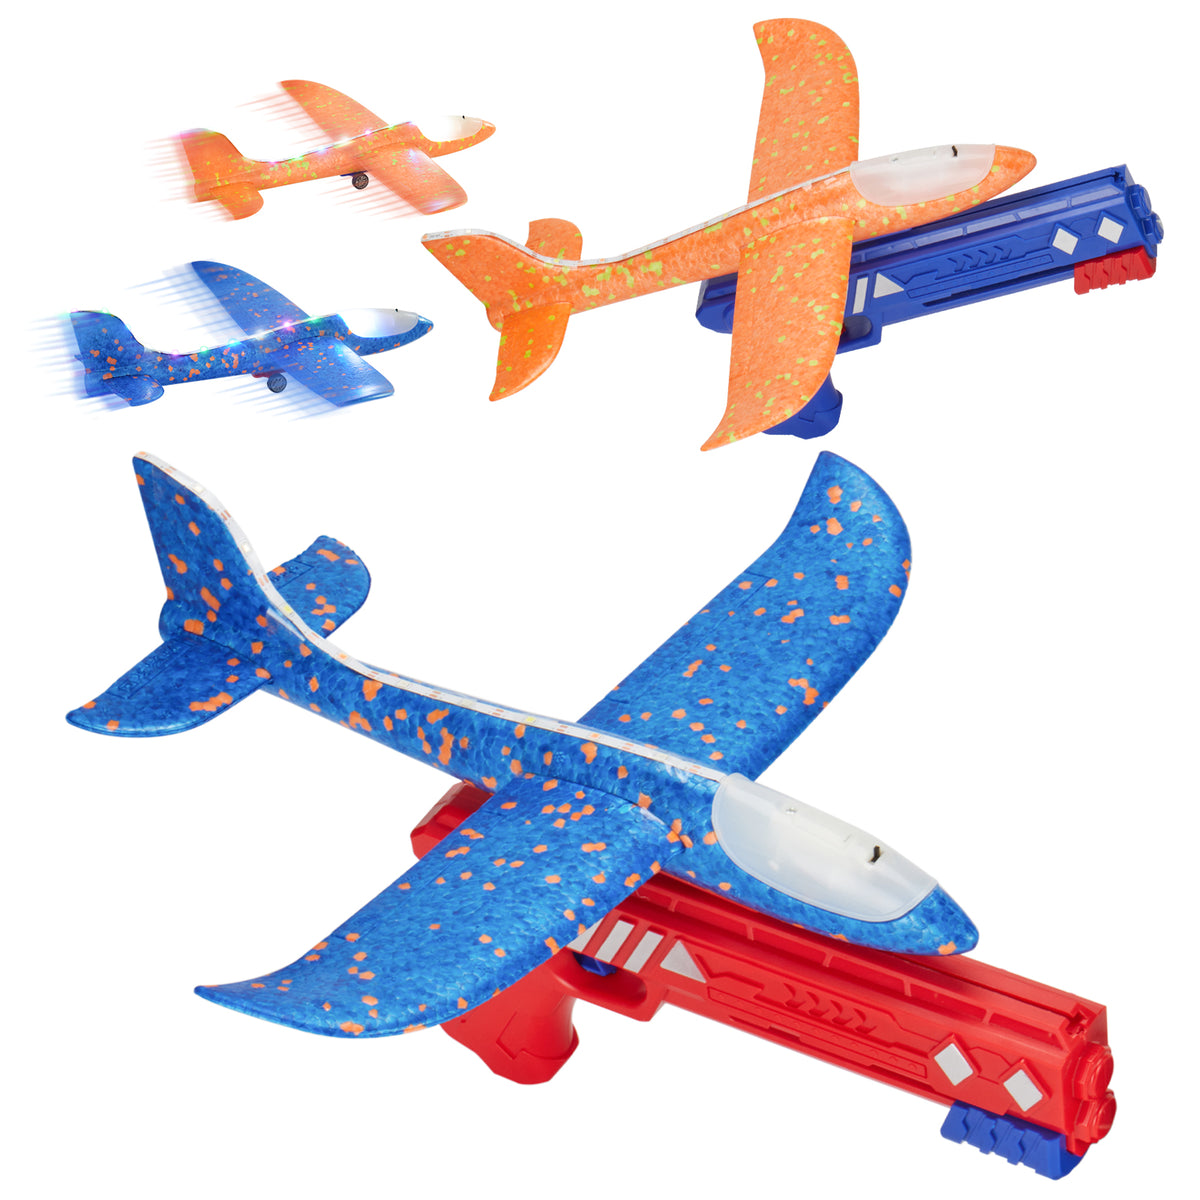 Educational Airplane Toy